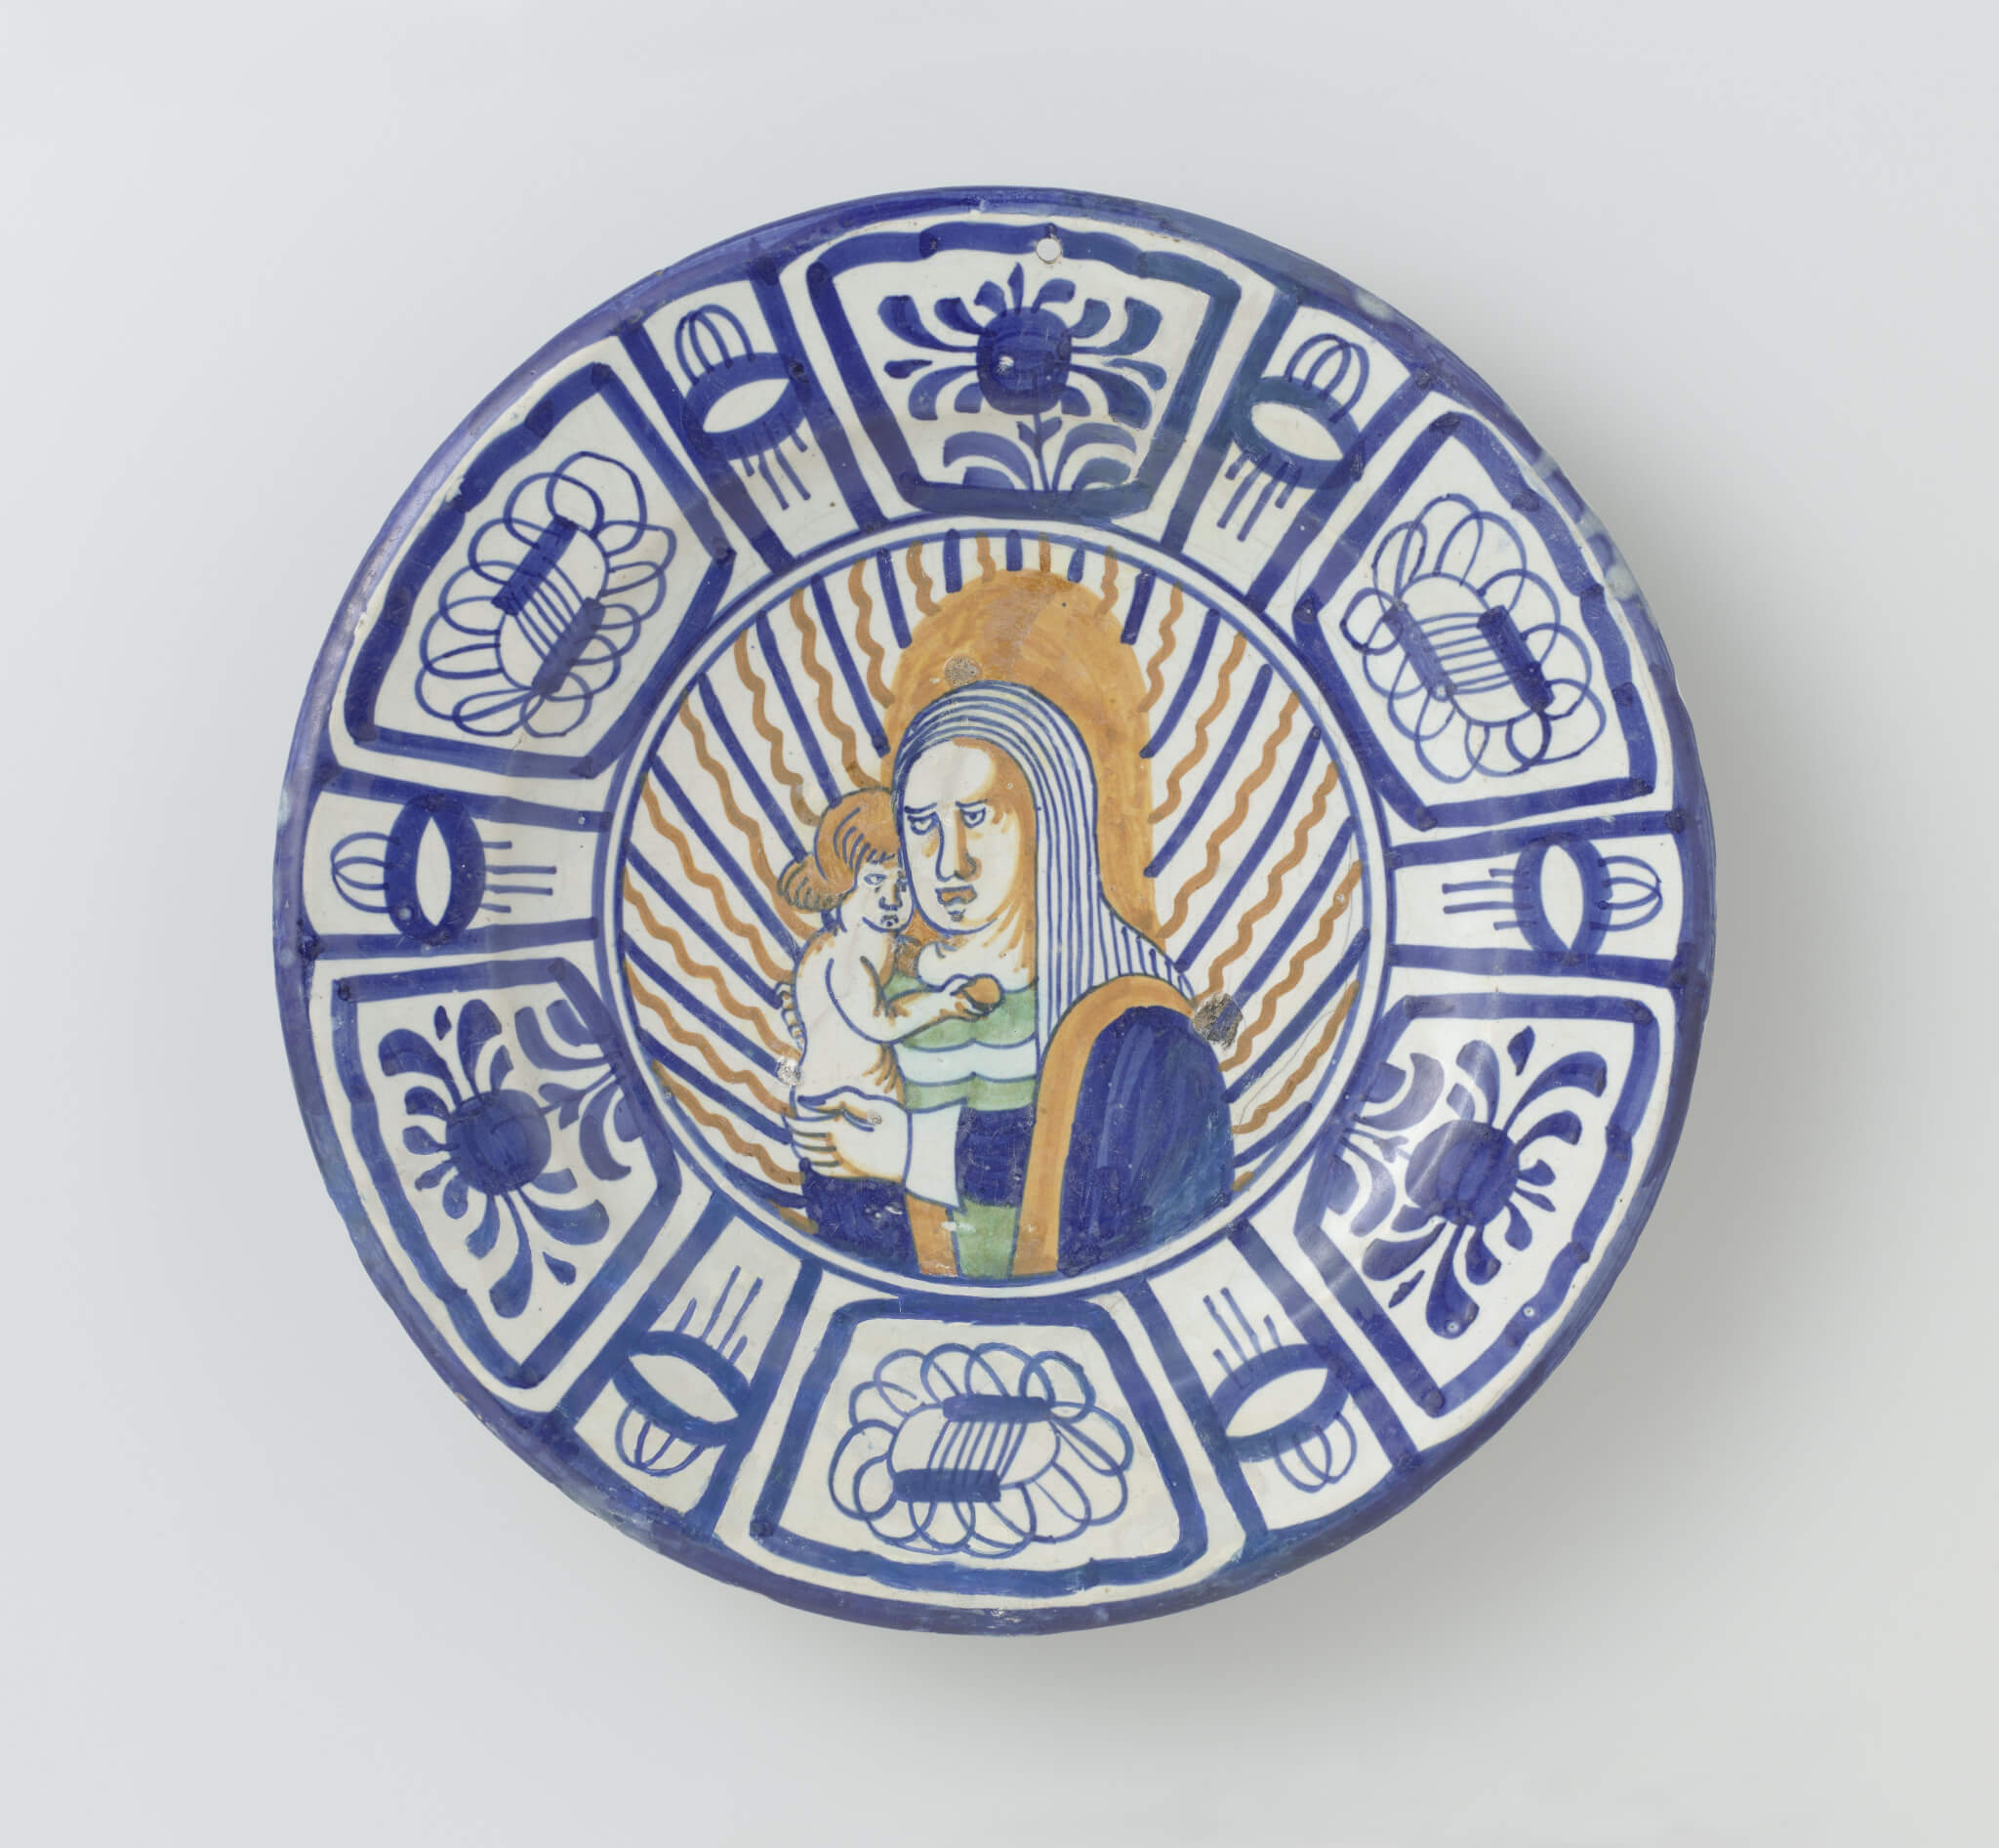 Majolica charger. Blue and orange. The Netherlands. 1625-1645